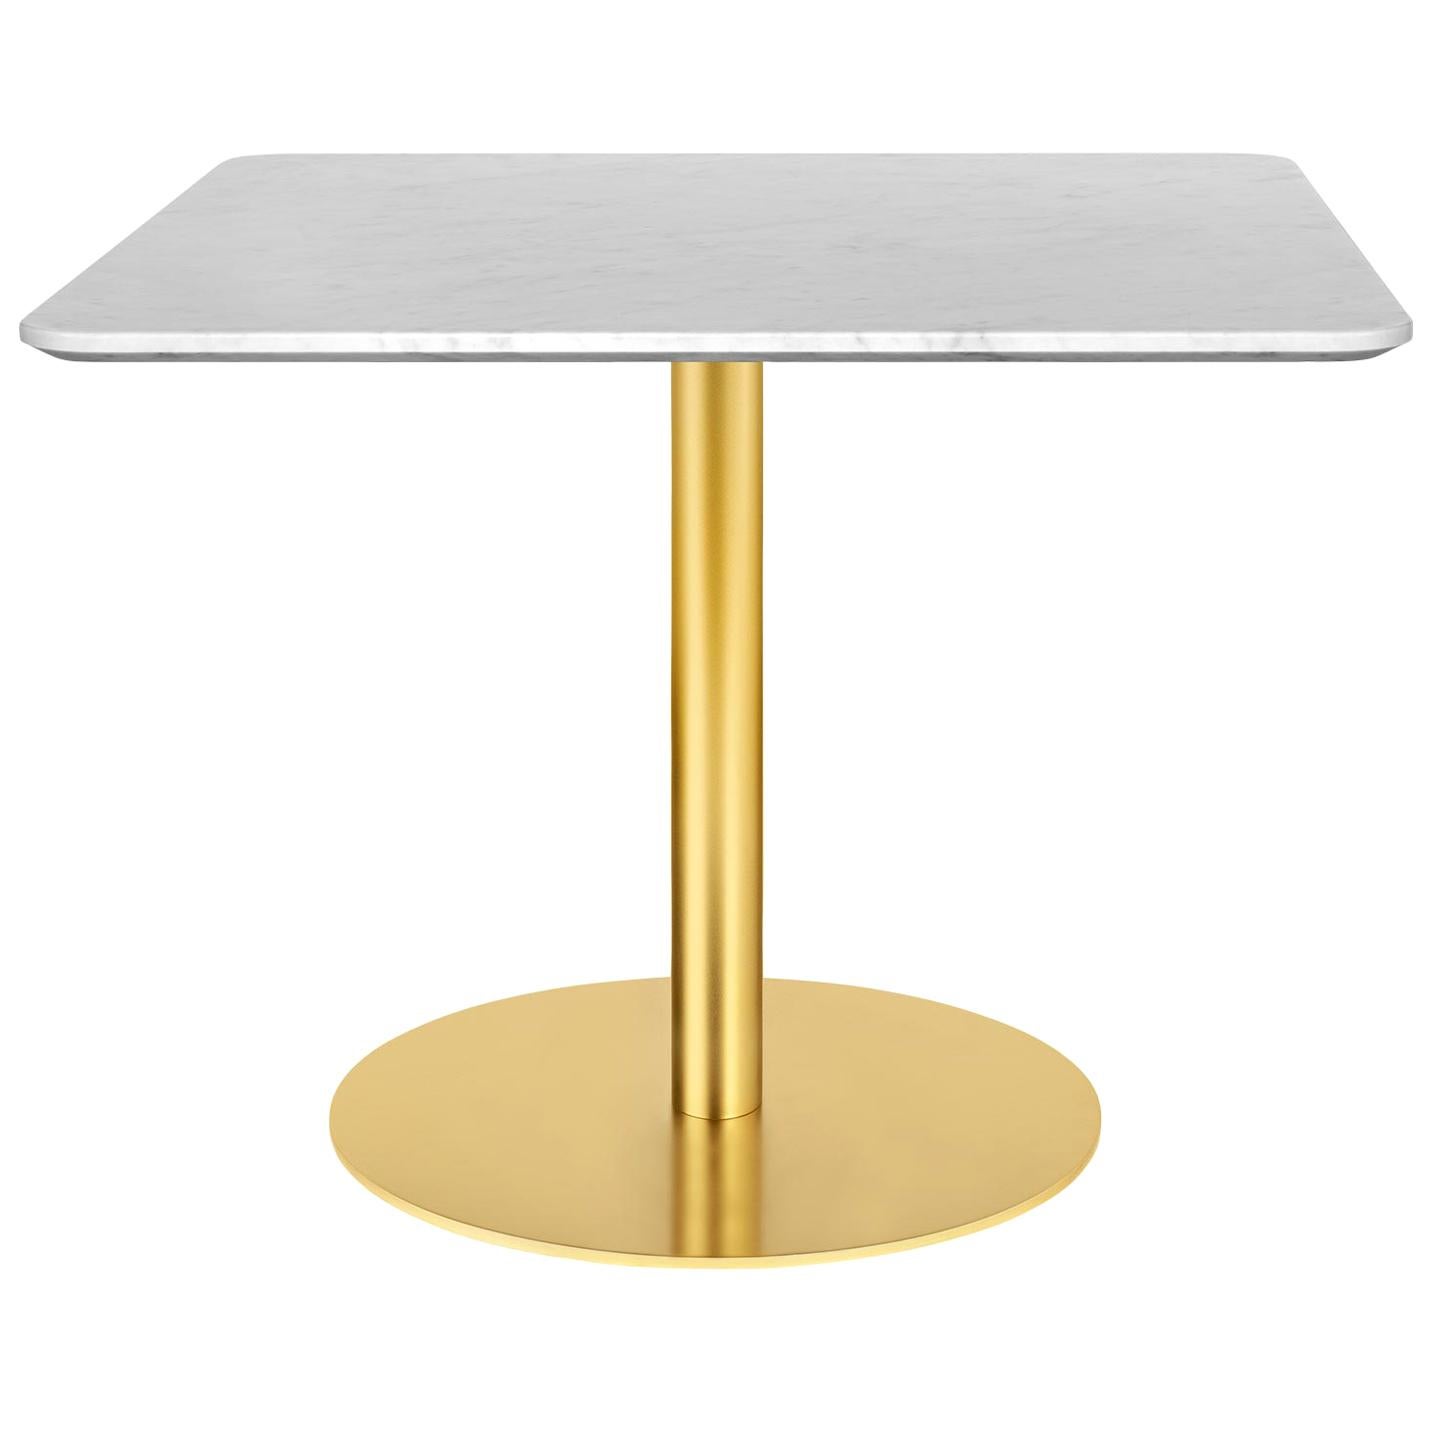 1.0 Lounge Table, Square, Round Brass Base, Large, Glass For Sale